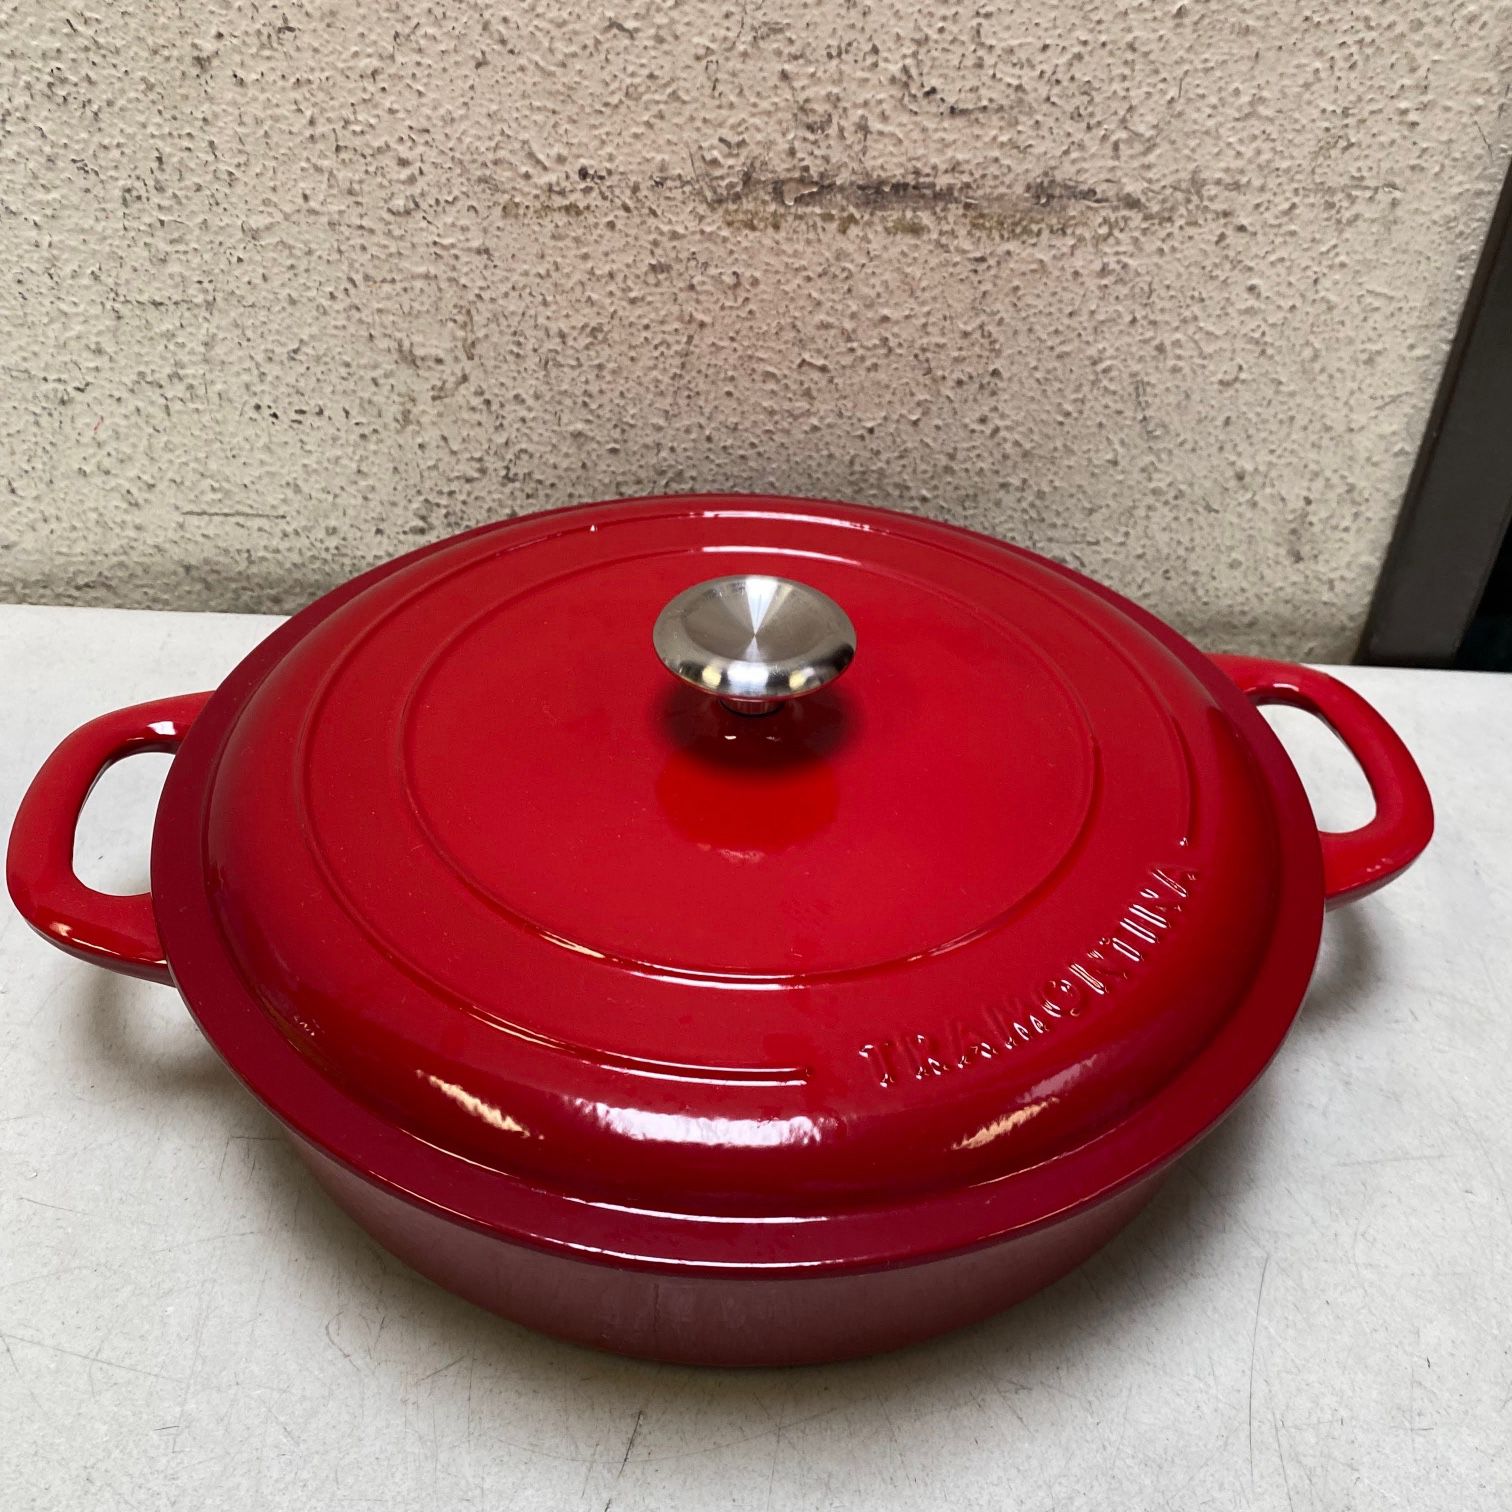 Tramontina 4-quart Covered Enameled Cast Iron Braiser for Sale in Ontario,  CA - OfferUp